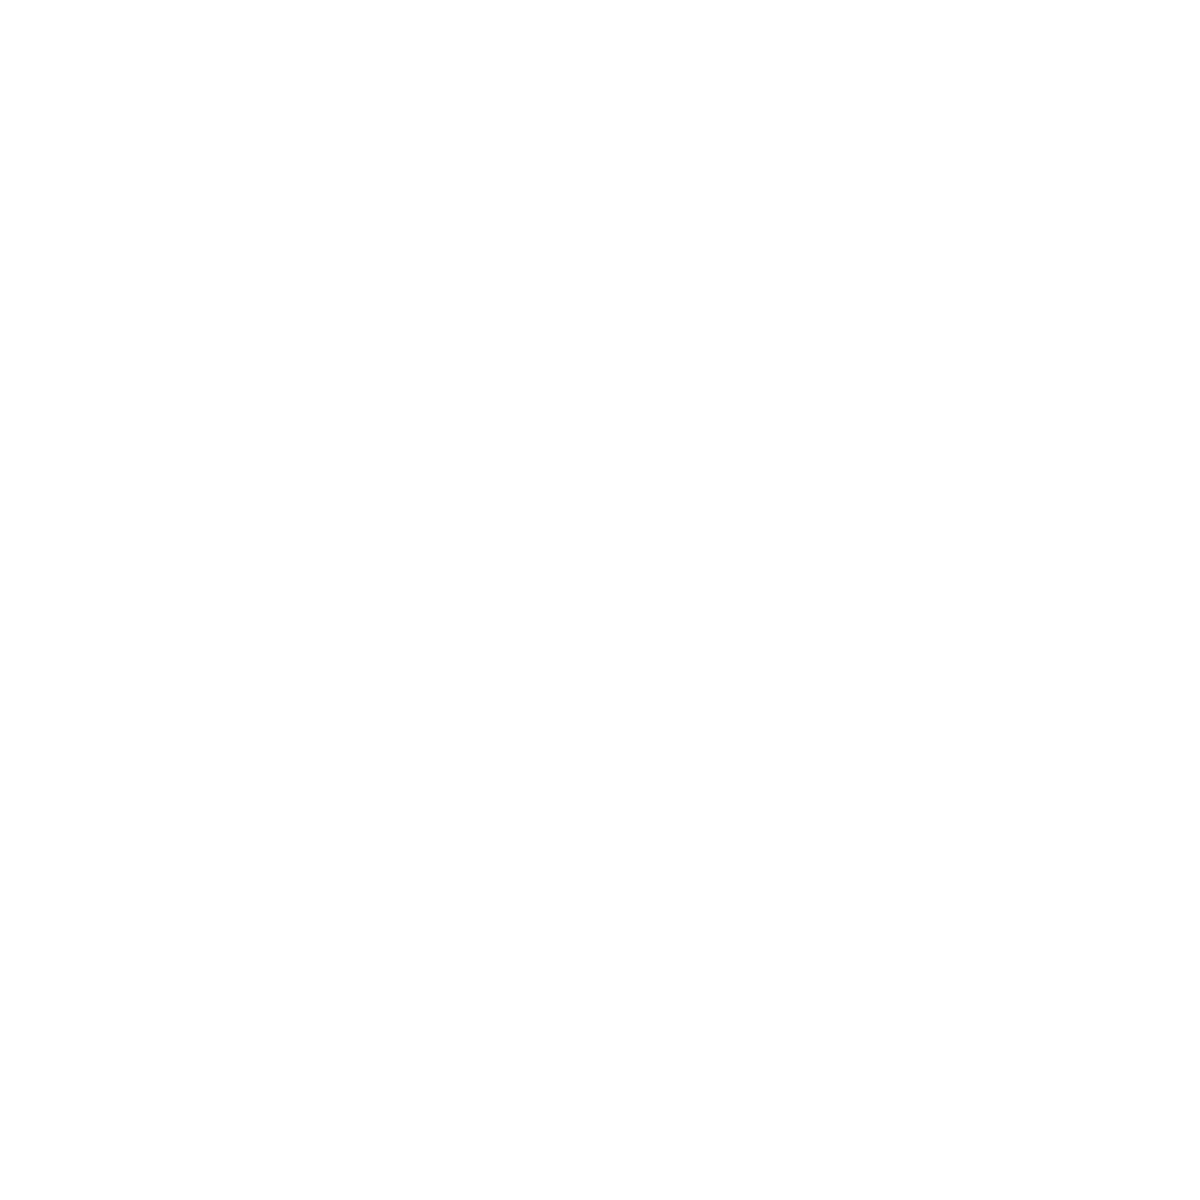 Icon of Hand Pointing to a Dollar Symbol